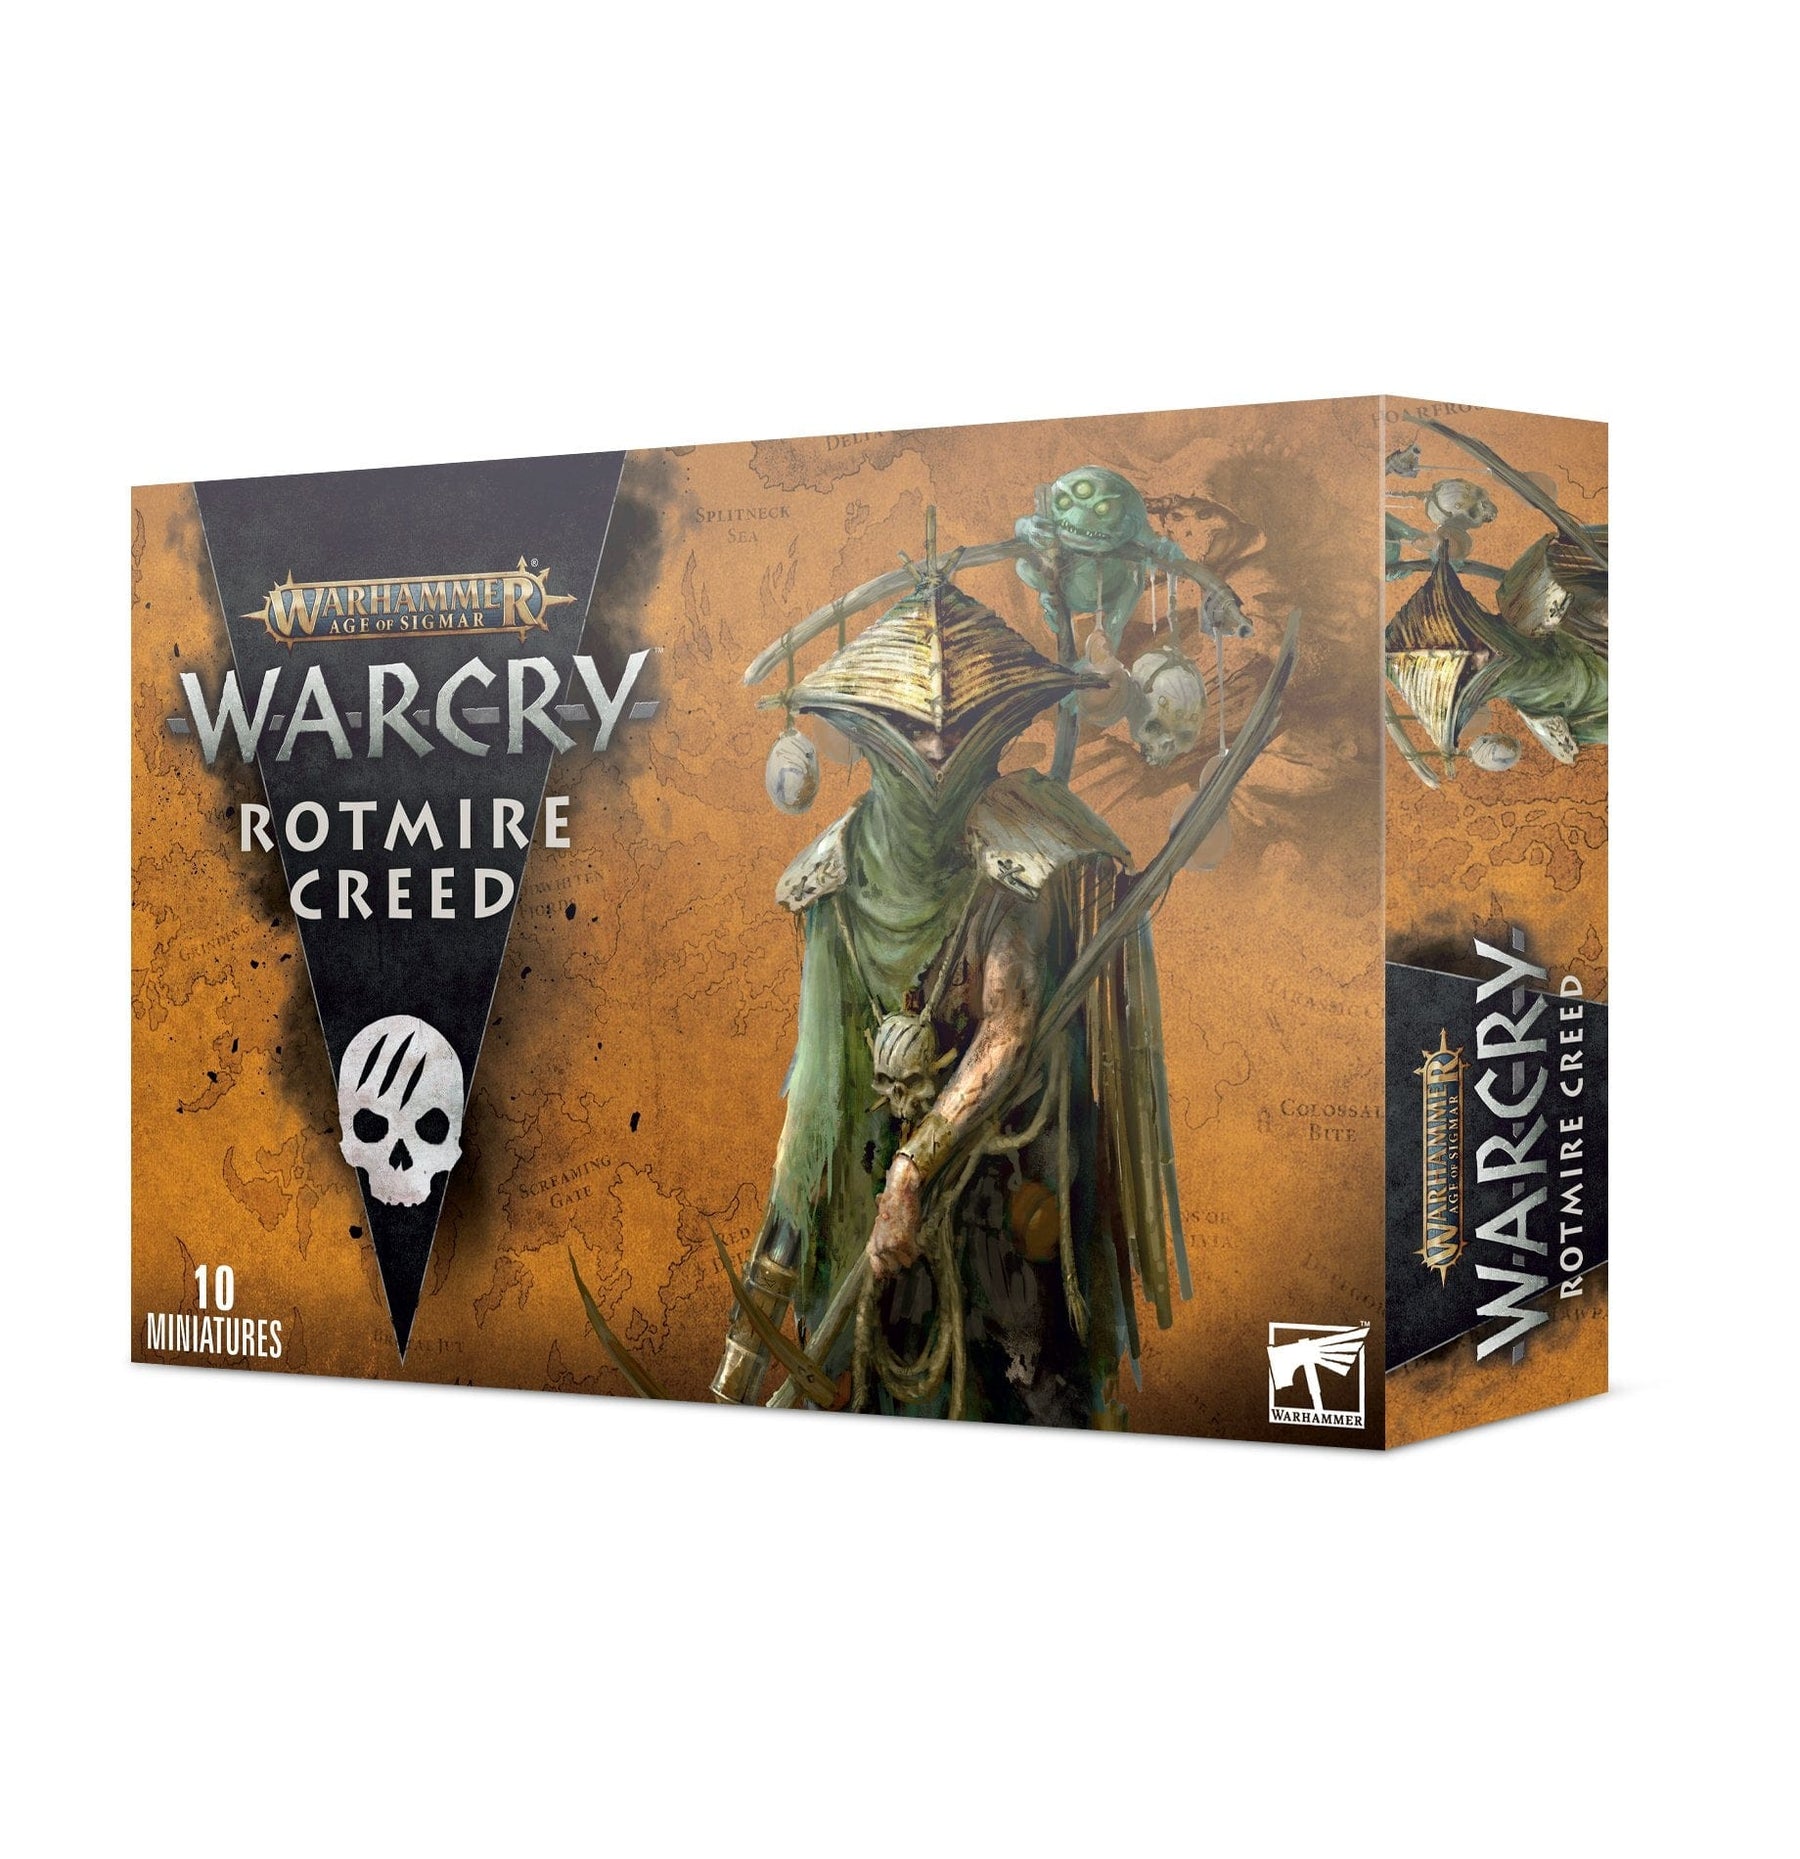 Warhammer - Age of Sigmar Warcry: Rotmire Creed - Third Eye